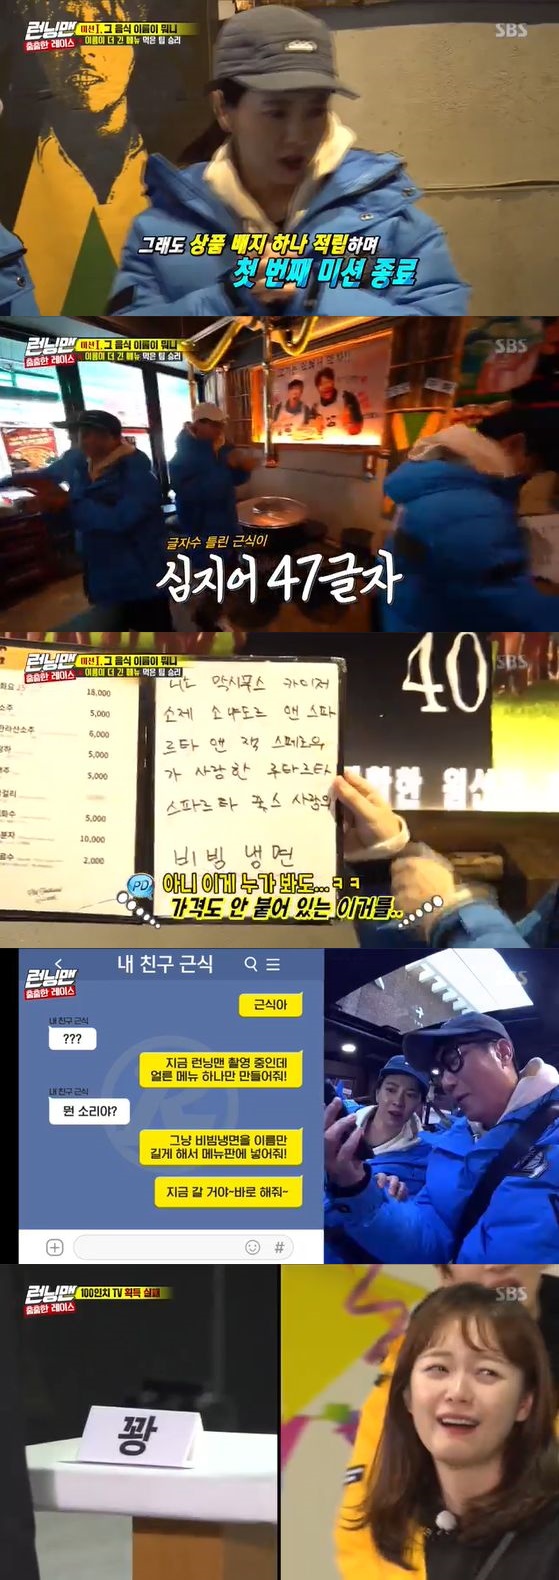 Haha created the longest menu name in his shop at the mission.On SBS weekend entertainment Running Man broadcasted on the afternoon of the 9th, we made menus for mission and tricked them.The first mission of the members who competed with the team and the team was eating a menu with a longer name than the other team.Suddenly Haha started to go somewhere, saying, I found a place with 45 letters of menu name in the stone team that struggled to find a long menu name.Somehow, they went to a restaurant familiar to the members, which was a branded restaurant run by Kim Jong Kook and Haha.With the doubts of the production team behind them, the members entered the restaurant.The production team said, I have been here a lot, but I have never heard of such a menu. The menu they showed was Bibim cold noodles.The name of Bibim cold noodles, which was made with Hahas song lyrics and Ninomaximus Kaiser Soje..., was 47 letters.When the production team, who knew and deceived, asked, I do not have a price tag, but it is really right. Yoo Jae-Suk hurriedly said, Cold noodles are not like Bibim cold noodles.When I finished with 5,000 won, the production team again said, I will admit if there is anything different from the general Bibim cold noodles.In the end, Song Ji-hyo tasted the menu, which he said was different in egg shape, as a representative after ordering it.Song Ji-hyo, who ate all the food three minutes before the end of the mission, got a badge.However, the members mission failed with a smile behind the equity with the team.On the other hand, the members had to meet the ambassador of the memorable top goal CF after moving to the second round mission.Jung won the commission and Choices to select 100-inch TVs, but Choices to win the gifts of the members instead of TV.However, due to the reversal, the production team had a meeting with Ji Suk-jin and Jeon So-min, and it was said that there was no TV product in the first place.The more greedy you are, the more you will not be able to get a product badge. Eventually, Jeon So-min said, I will not be greedy again.